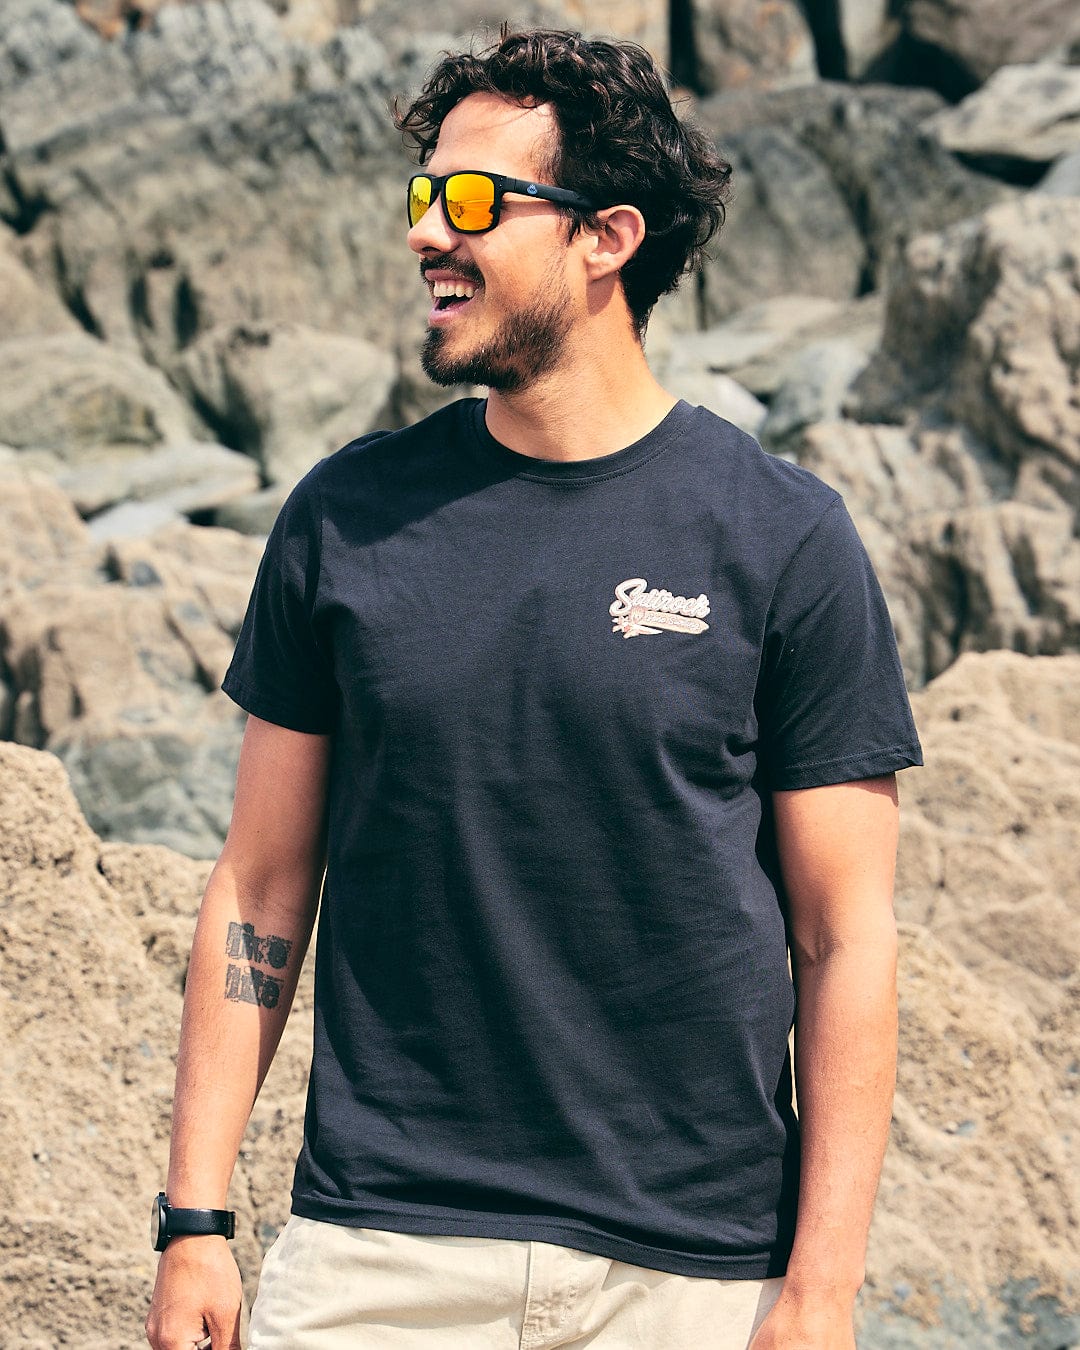 A man wearing sunglasses and a Saltrock Beach Sign Wales - Mens - Short Sleeve T- Shirt - Dark Grey in front of rocks.